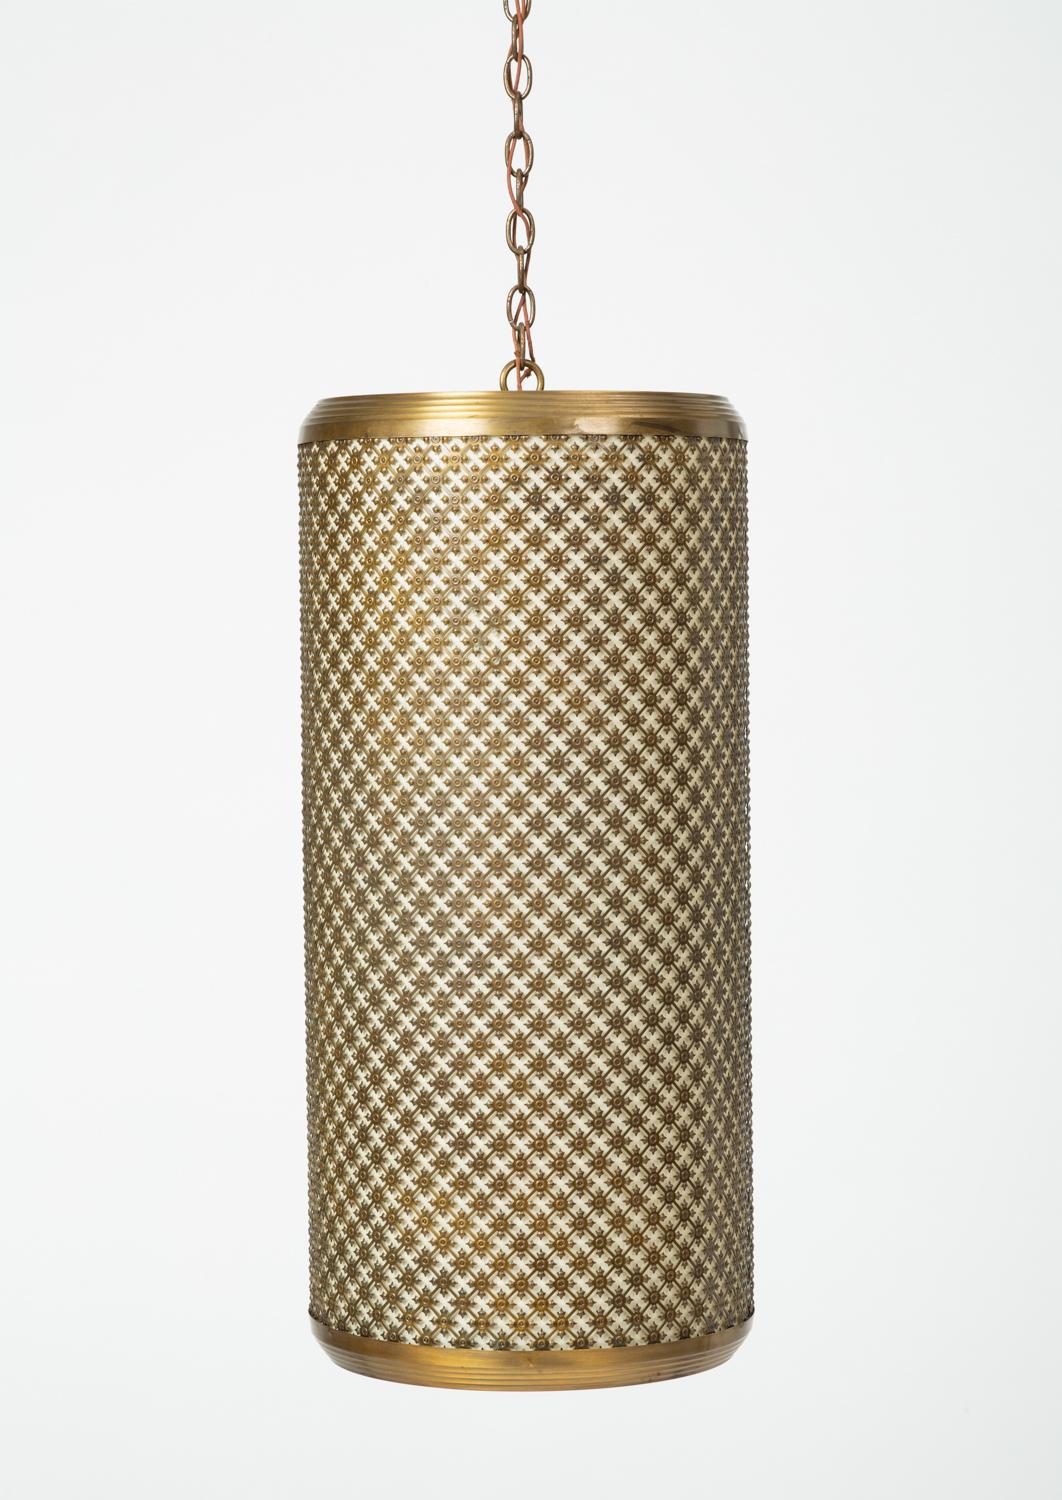 Cylindrical statement lighting from the Los Angeles-based Feldman Company. Their sculptural pieces spanned a broad spectrum of midcentury trends, including modernism, the so-called “Brutalist” aesthetic, and Hollywood Regency. This large-scale